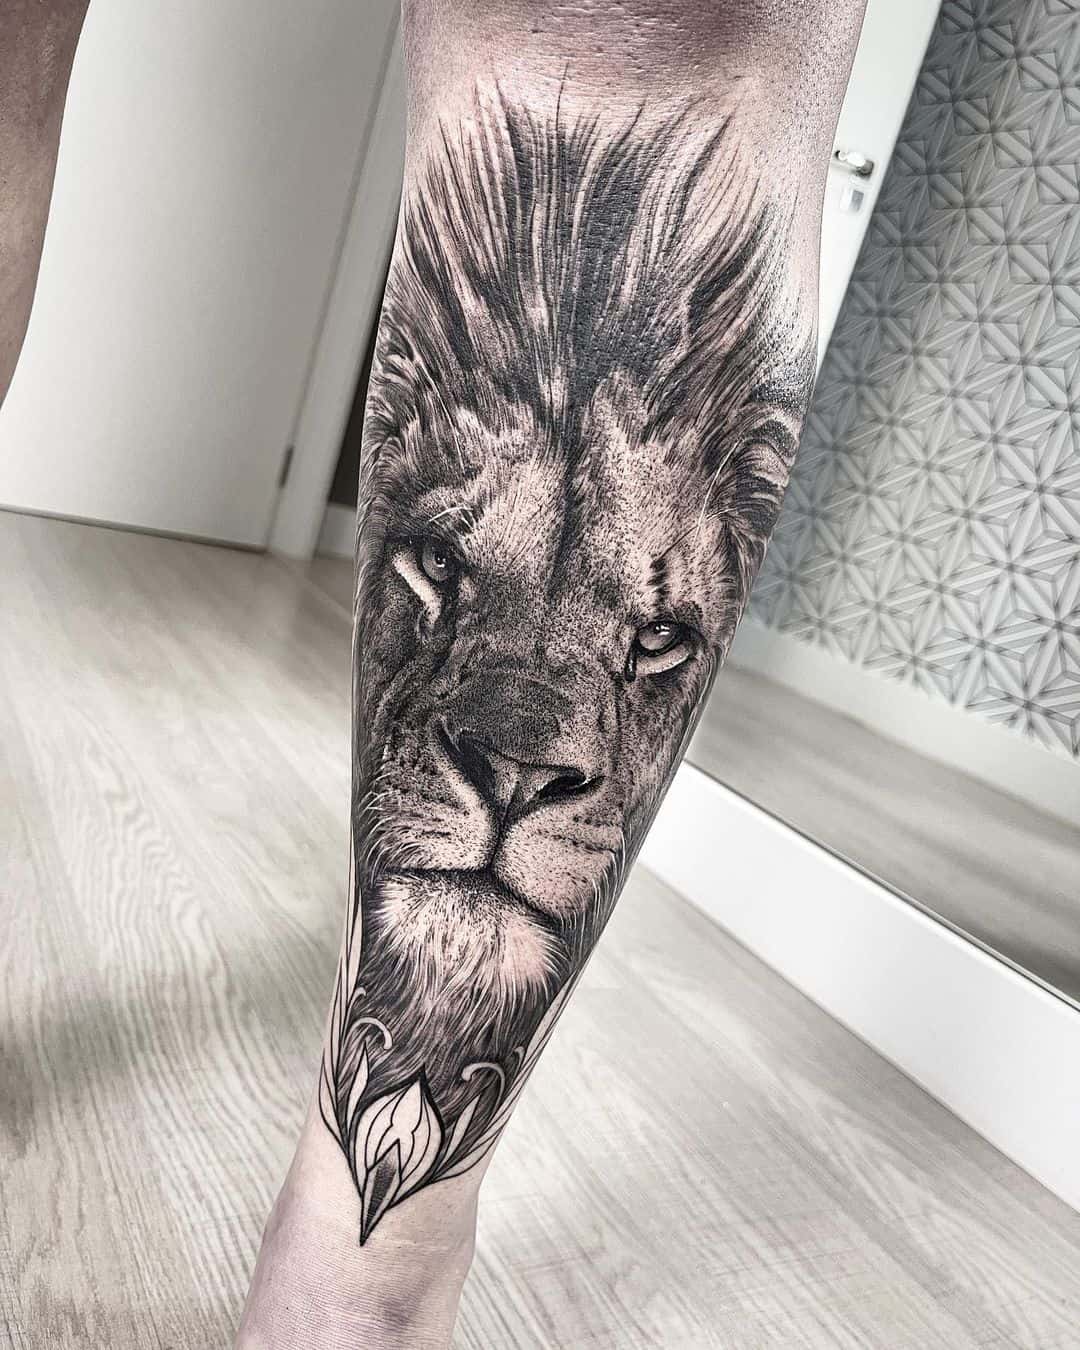 Amazon.com : Pencil Sketch Lion Temporary Tattoos For Men Adult Cover Up  Arm Tatoos Decal Realistic Black 3D Body Art Tattoos : Beauty & Personal  Care